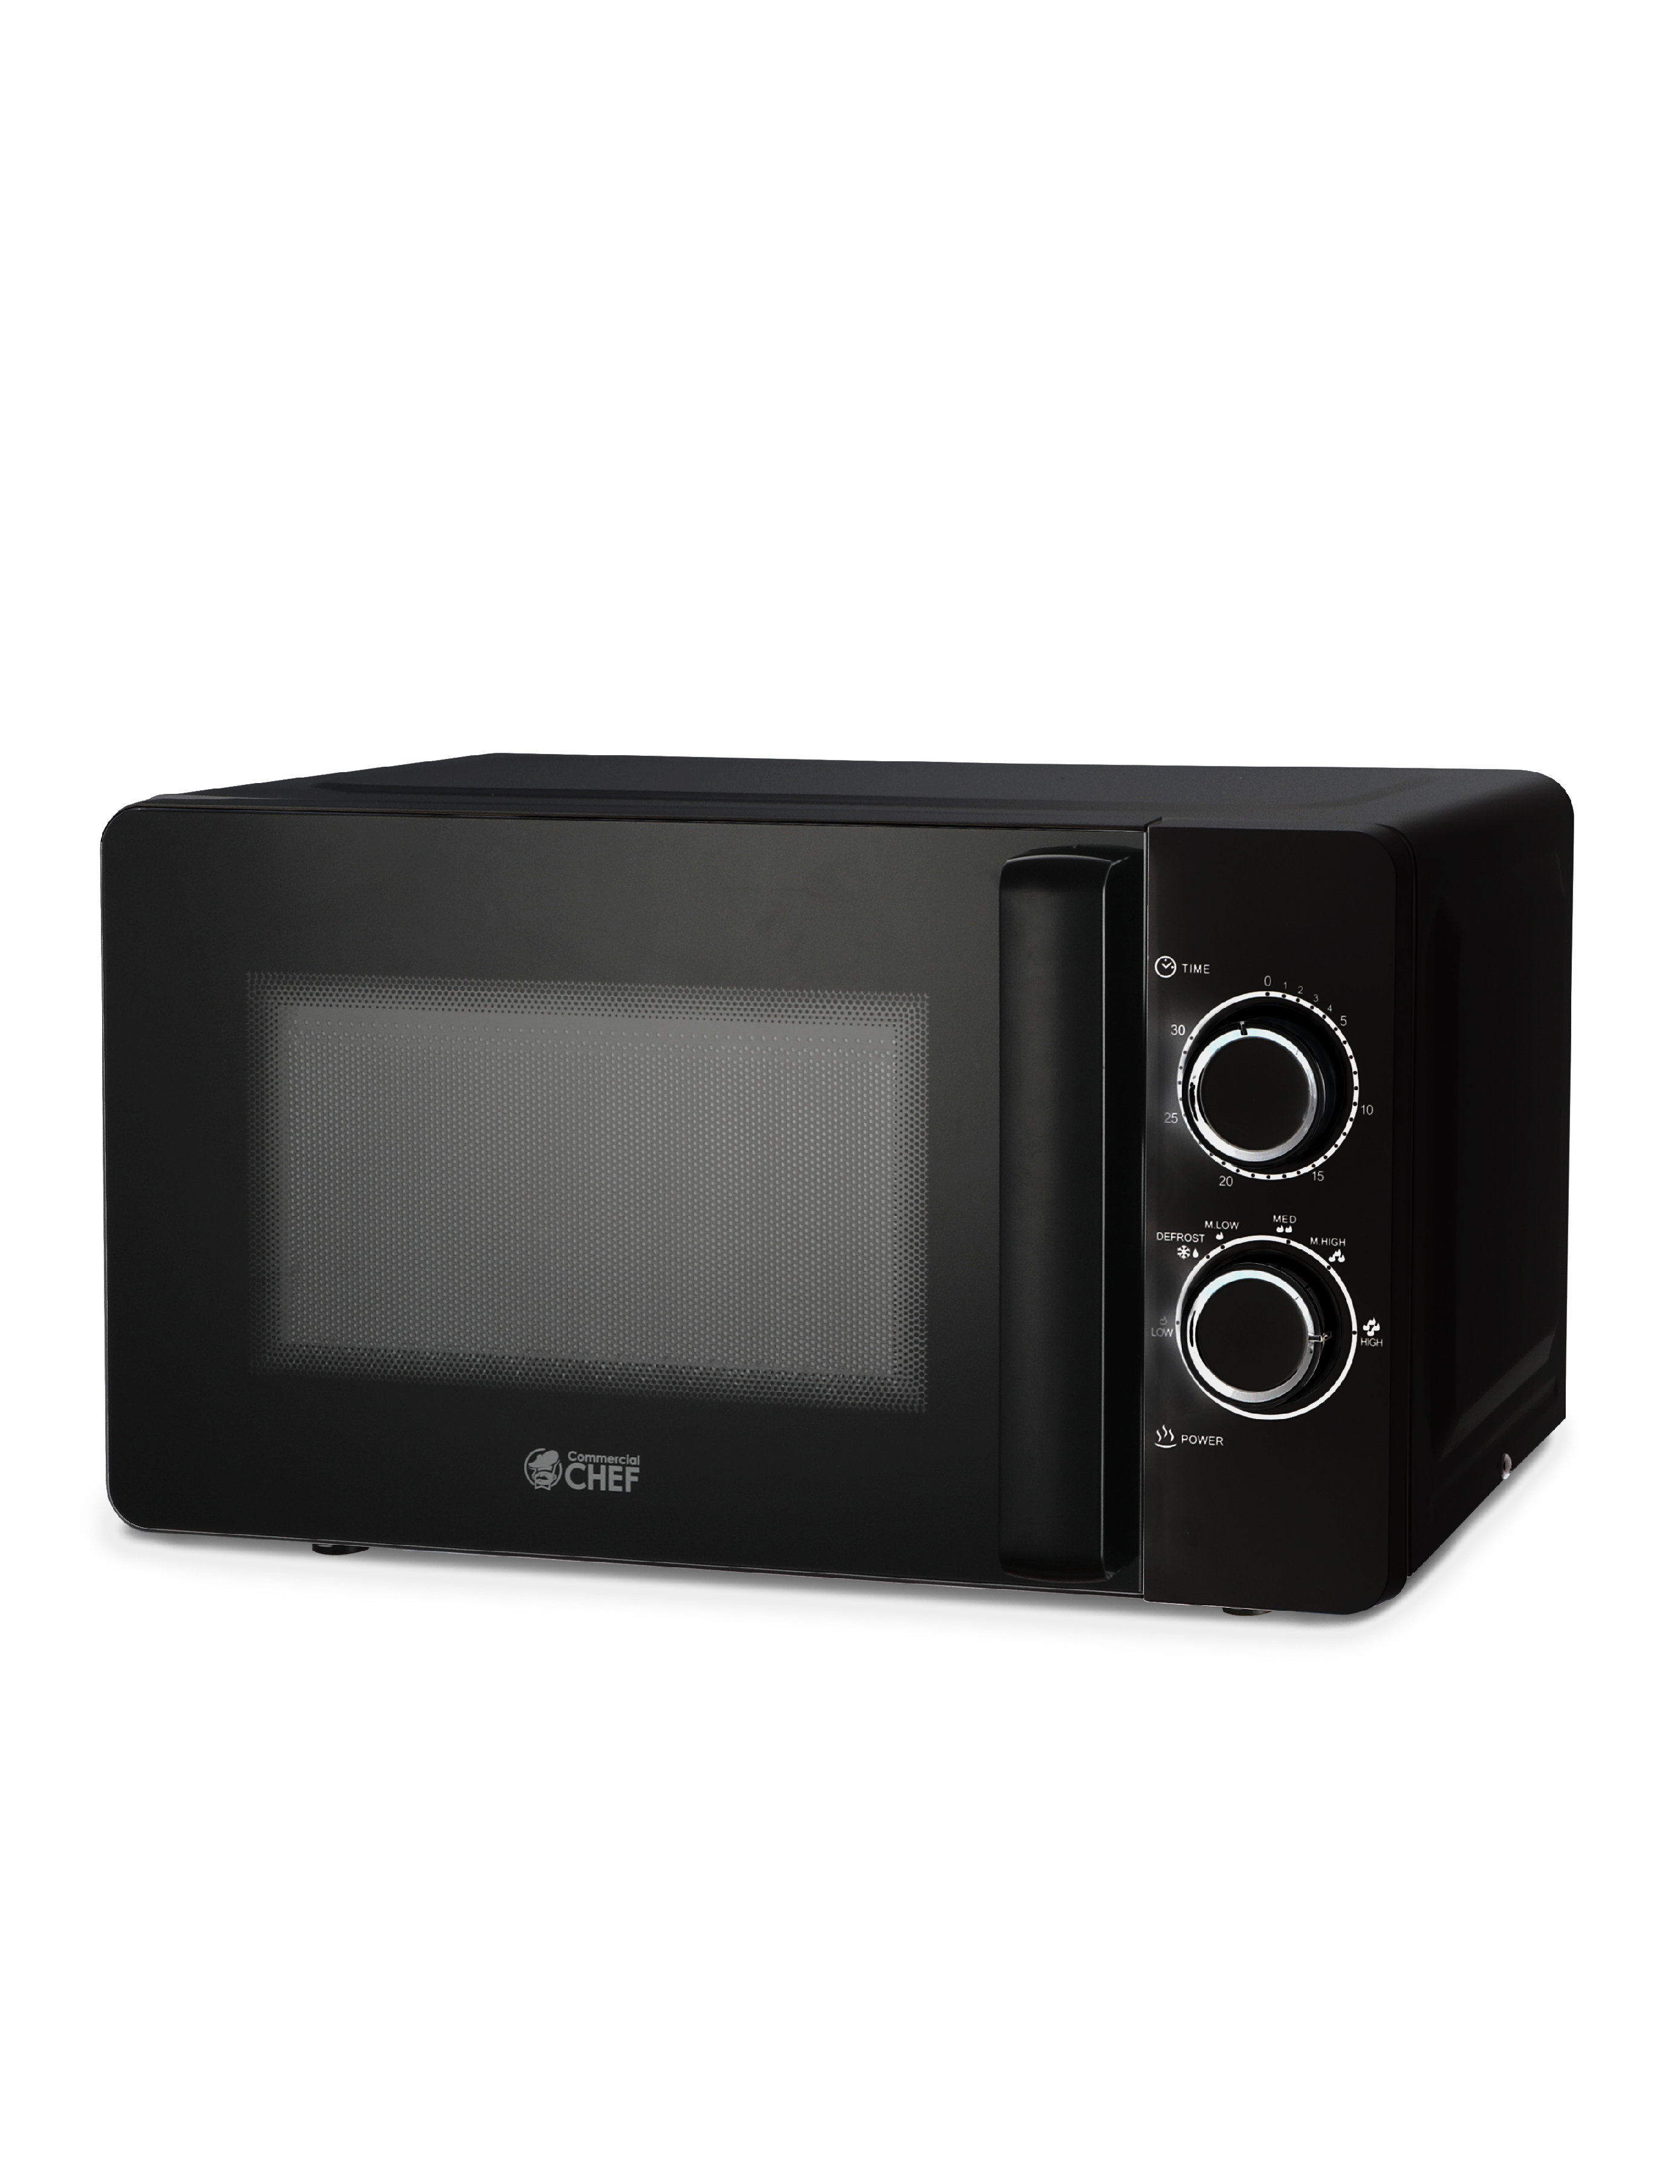 Best quietest microwave ovens 2022, by Portablemicrowave